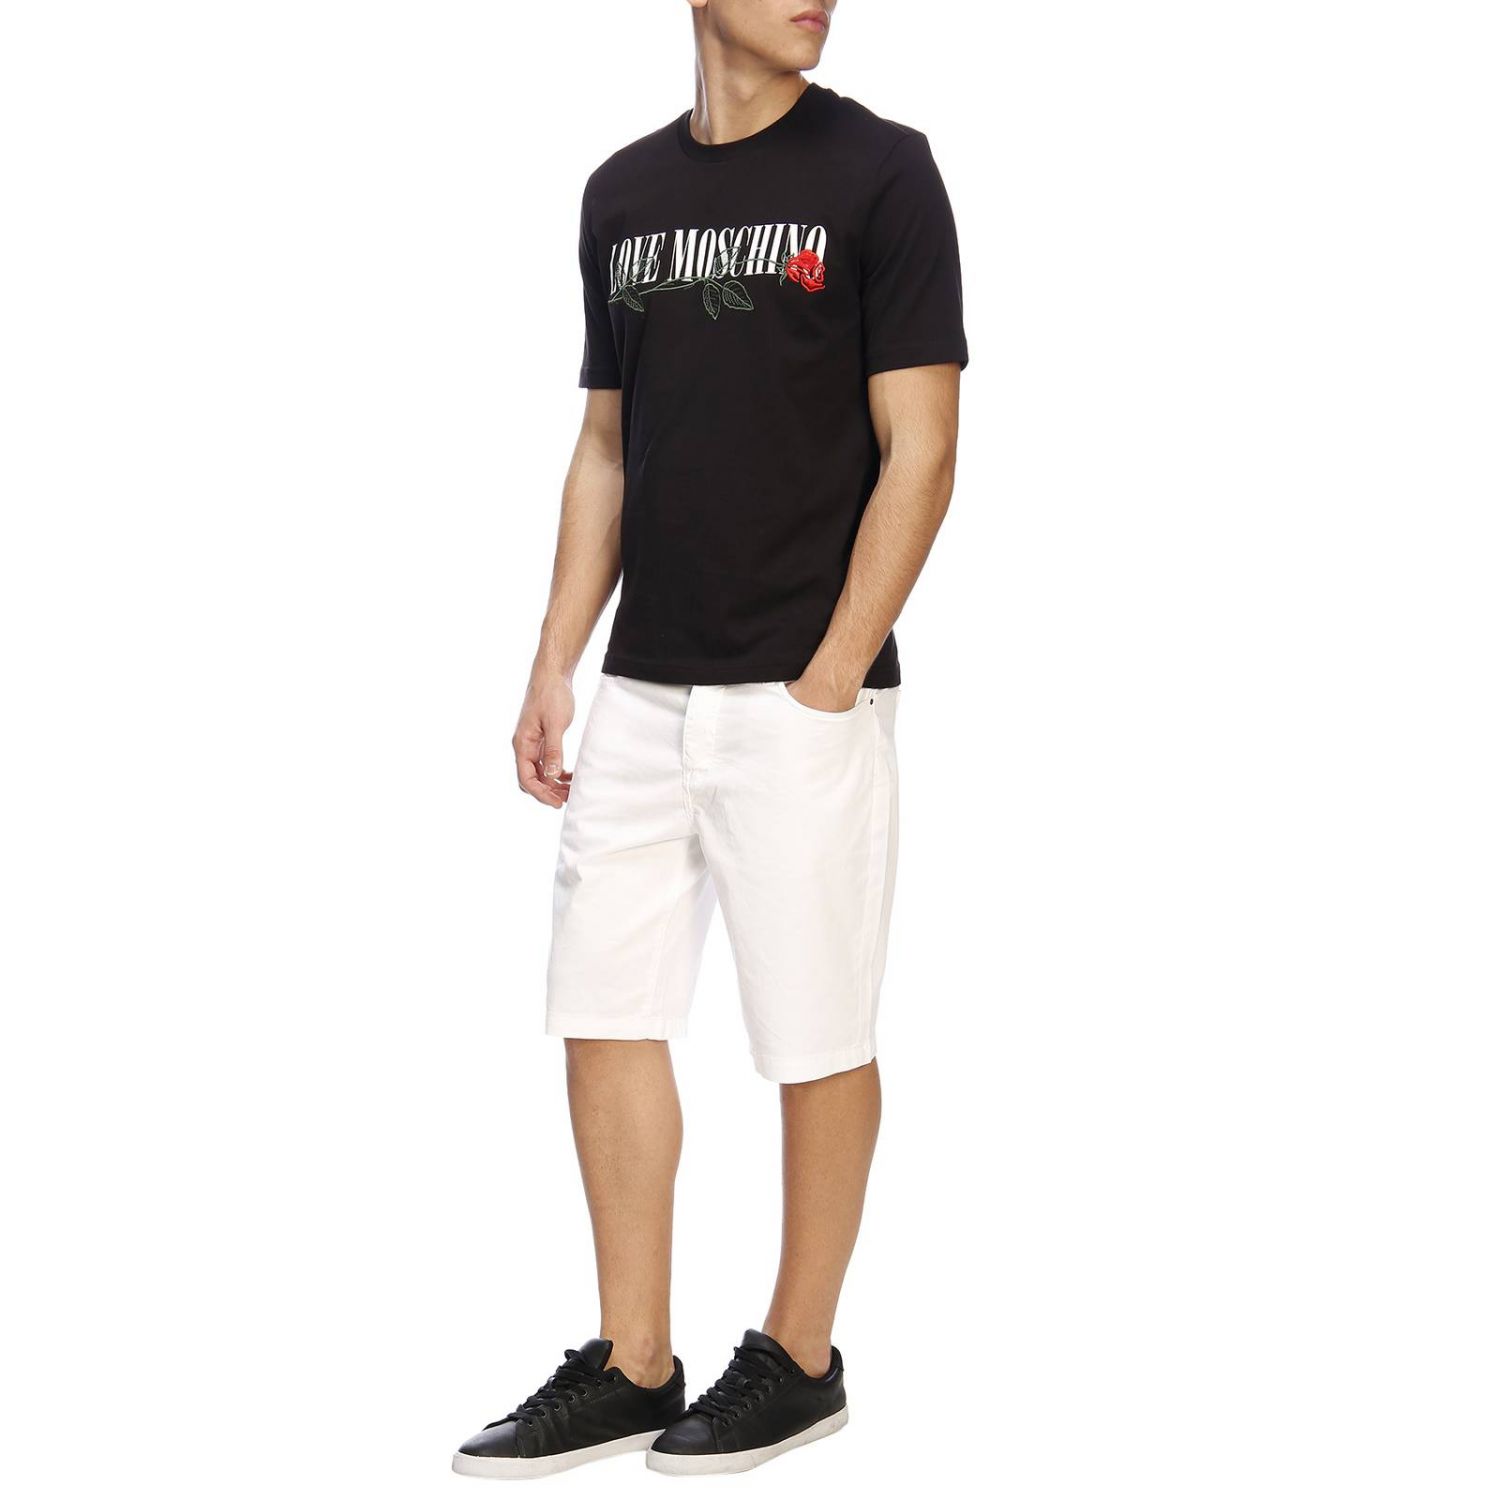 Love Moschino Outlet: t-shirt for man - Black | Love Moschino t-shirt ...